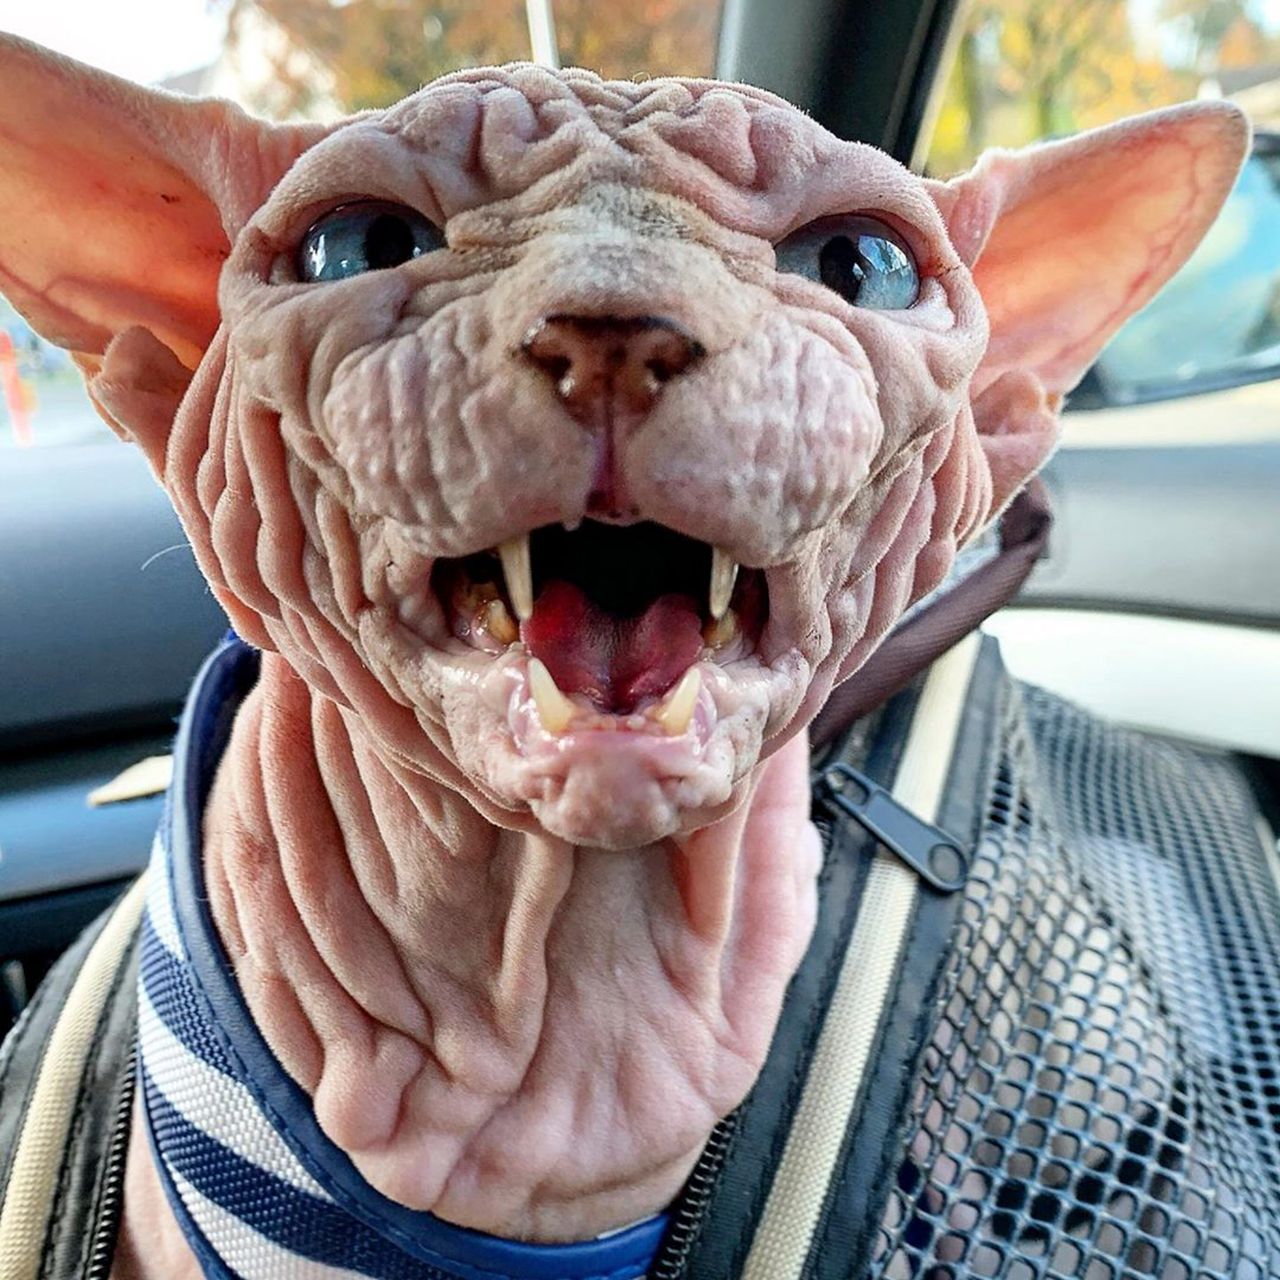 A sphynx cat covered in wrinkles has stolen the hearts of many on the internet thanks to his unique appearance.